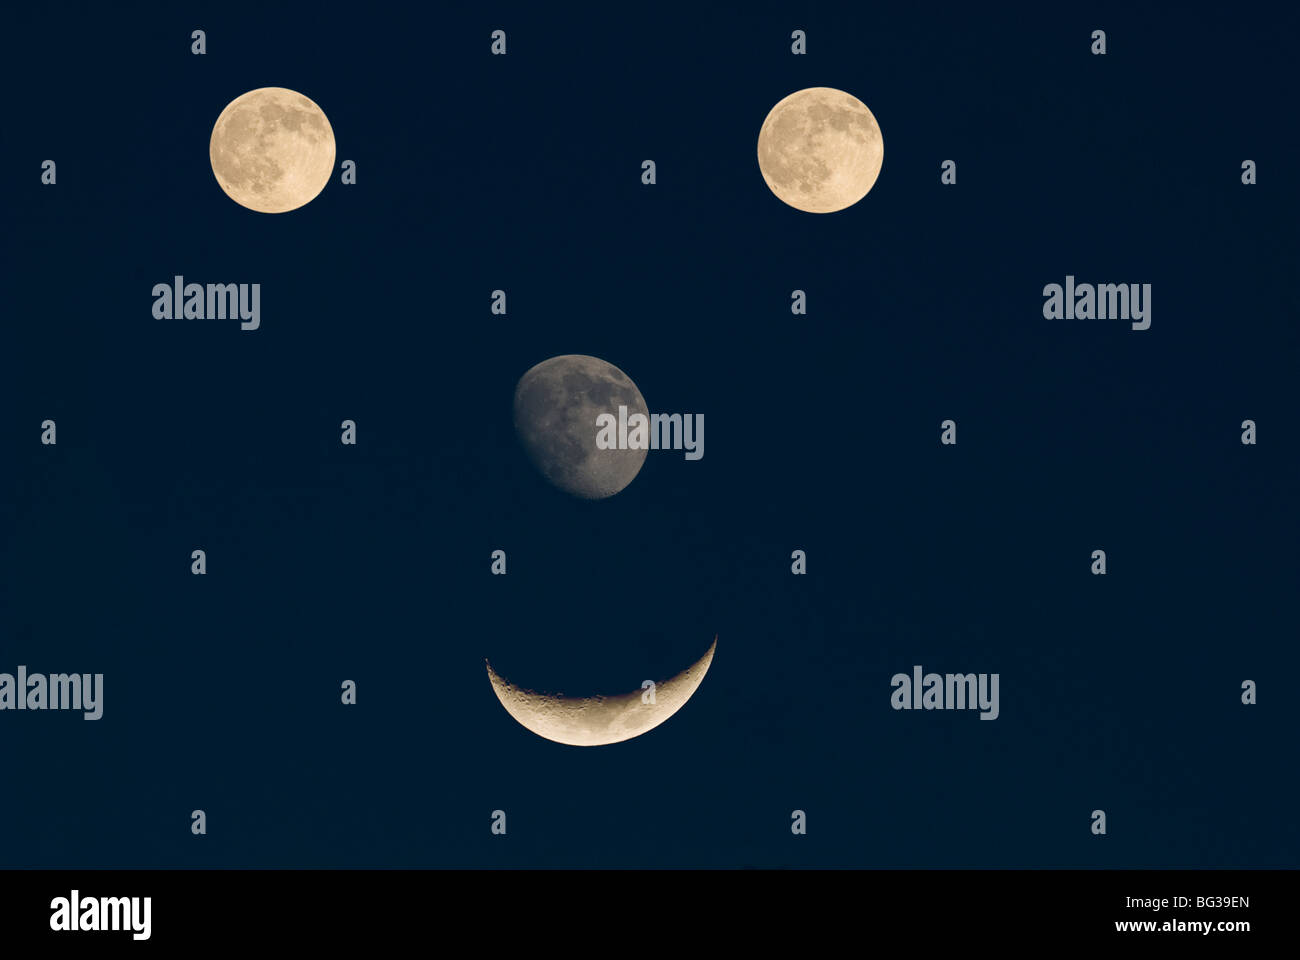 The moon can make a happy face. Stock Photo